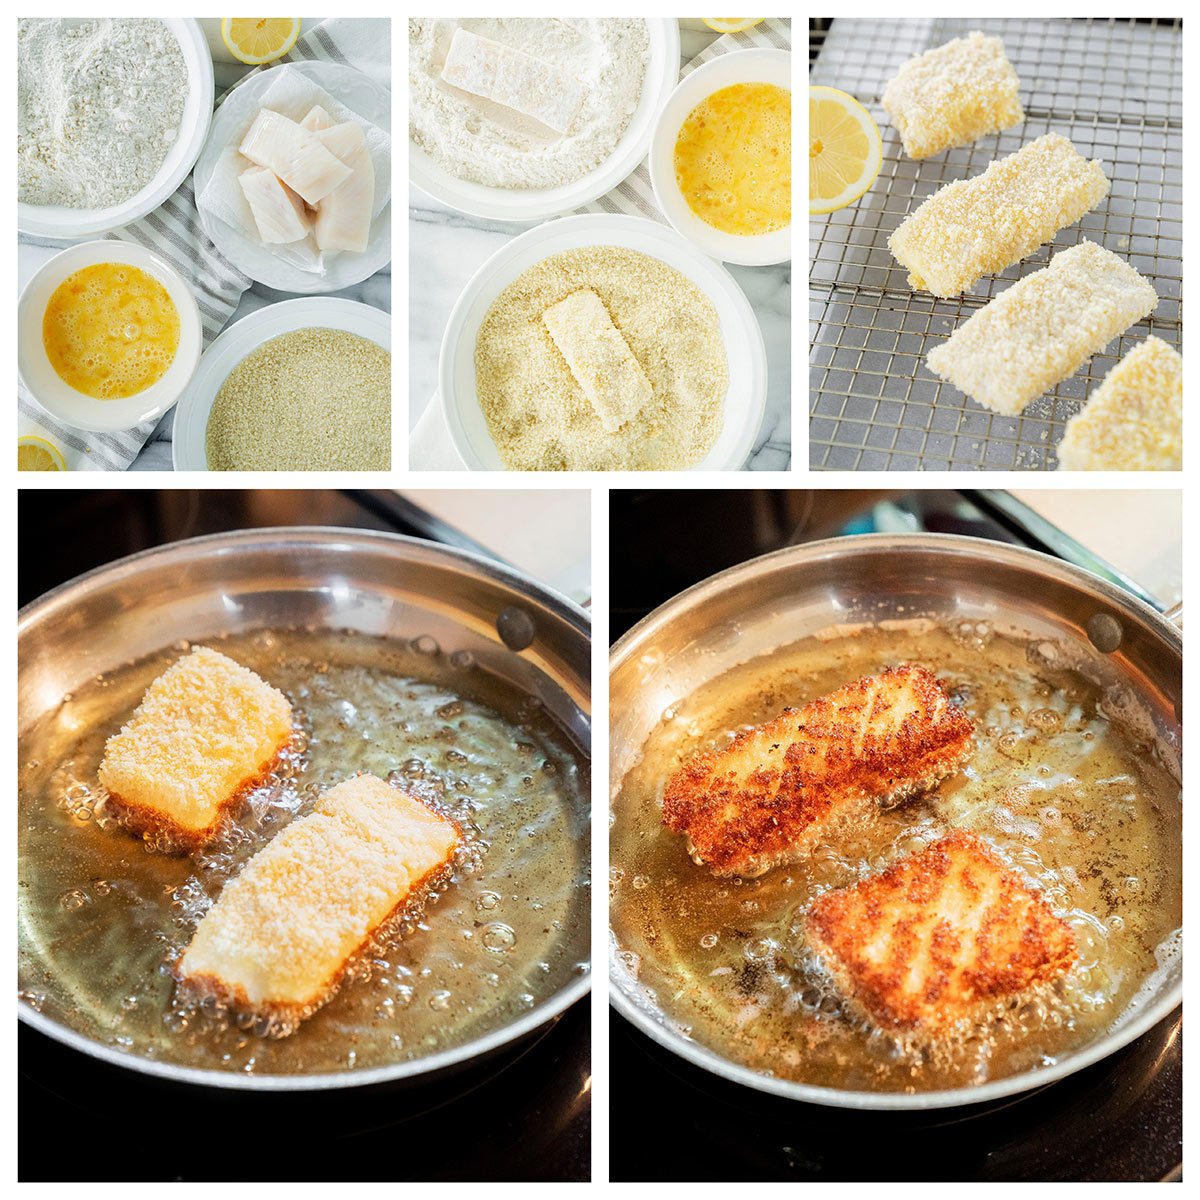 dredging halibut fillets in flour, eggs and panko breadcrumbs and frying in a skillet of oil